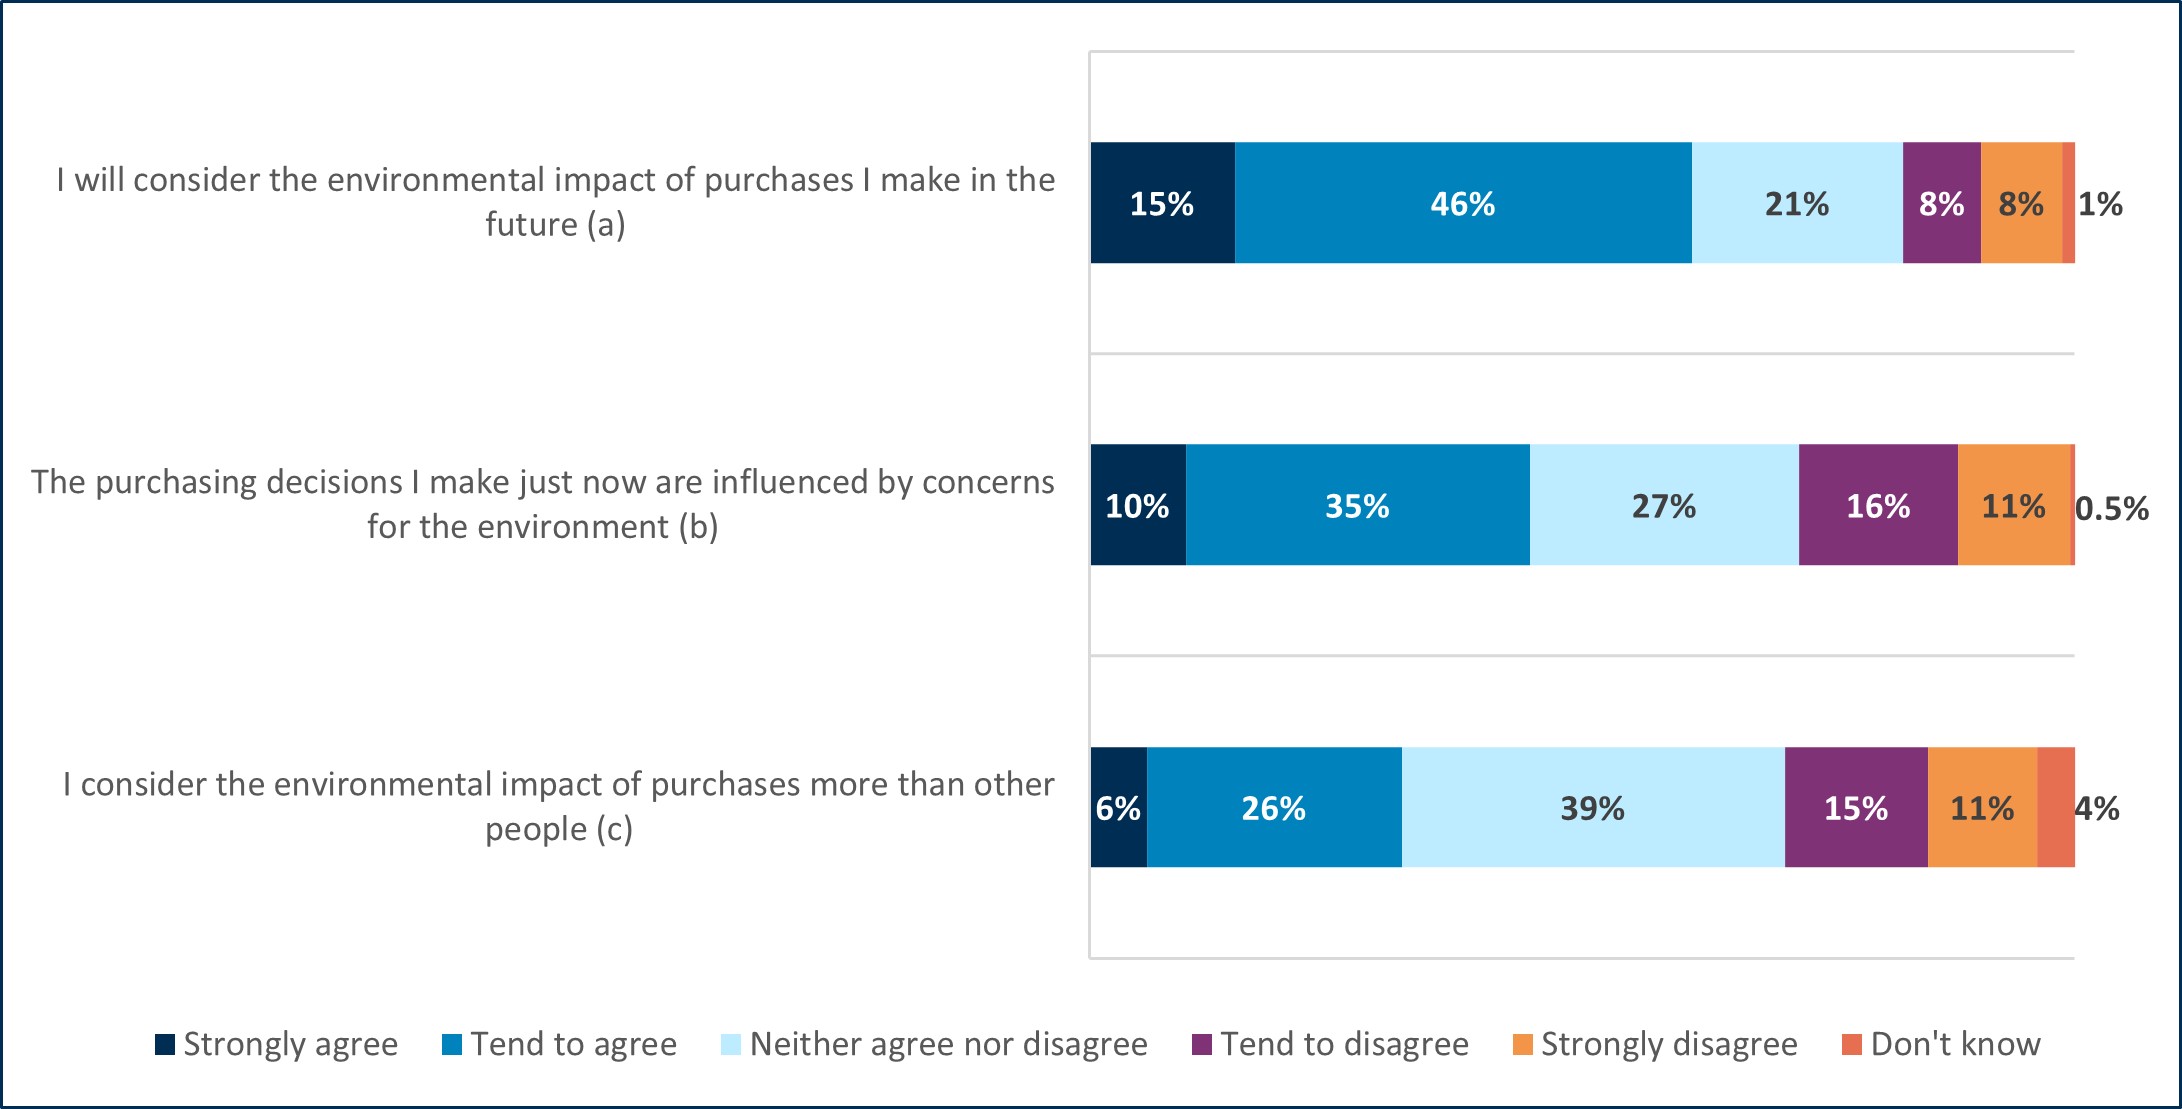 Data showing 45% of respondents agreed that their current purchasing decisions are influenced by concerns for the environment, with 27% disagreeing. 61% of respondents believe they will consider the environmental impact of purchases they will make in the future, with 16% disagreeing, and 33% agreeing that they believe they consider the environmental impact of purchases more than other people